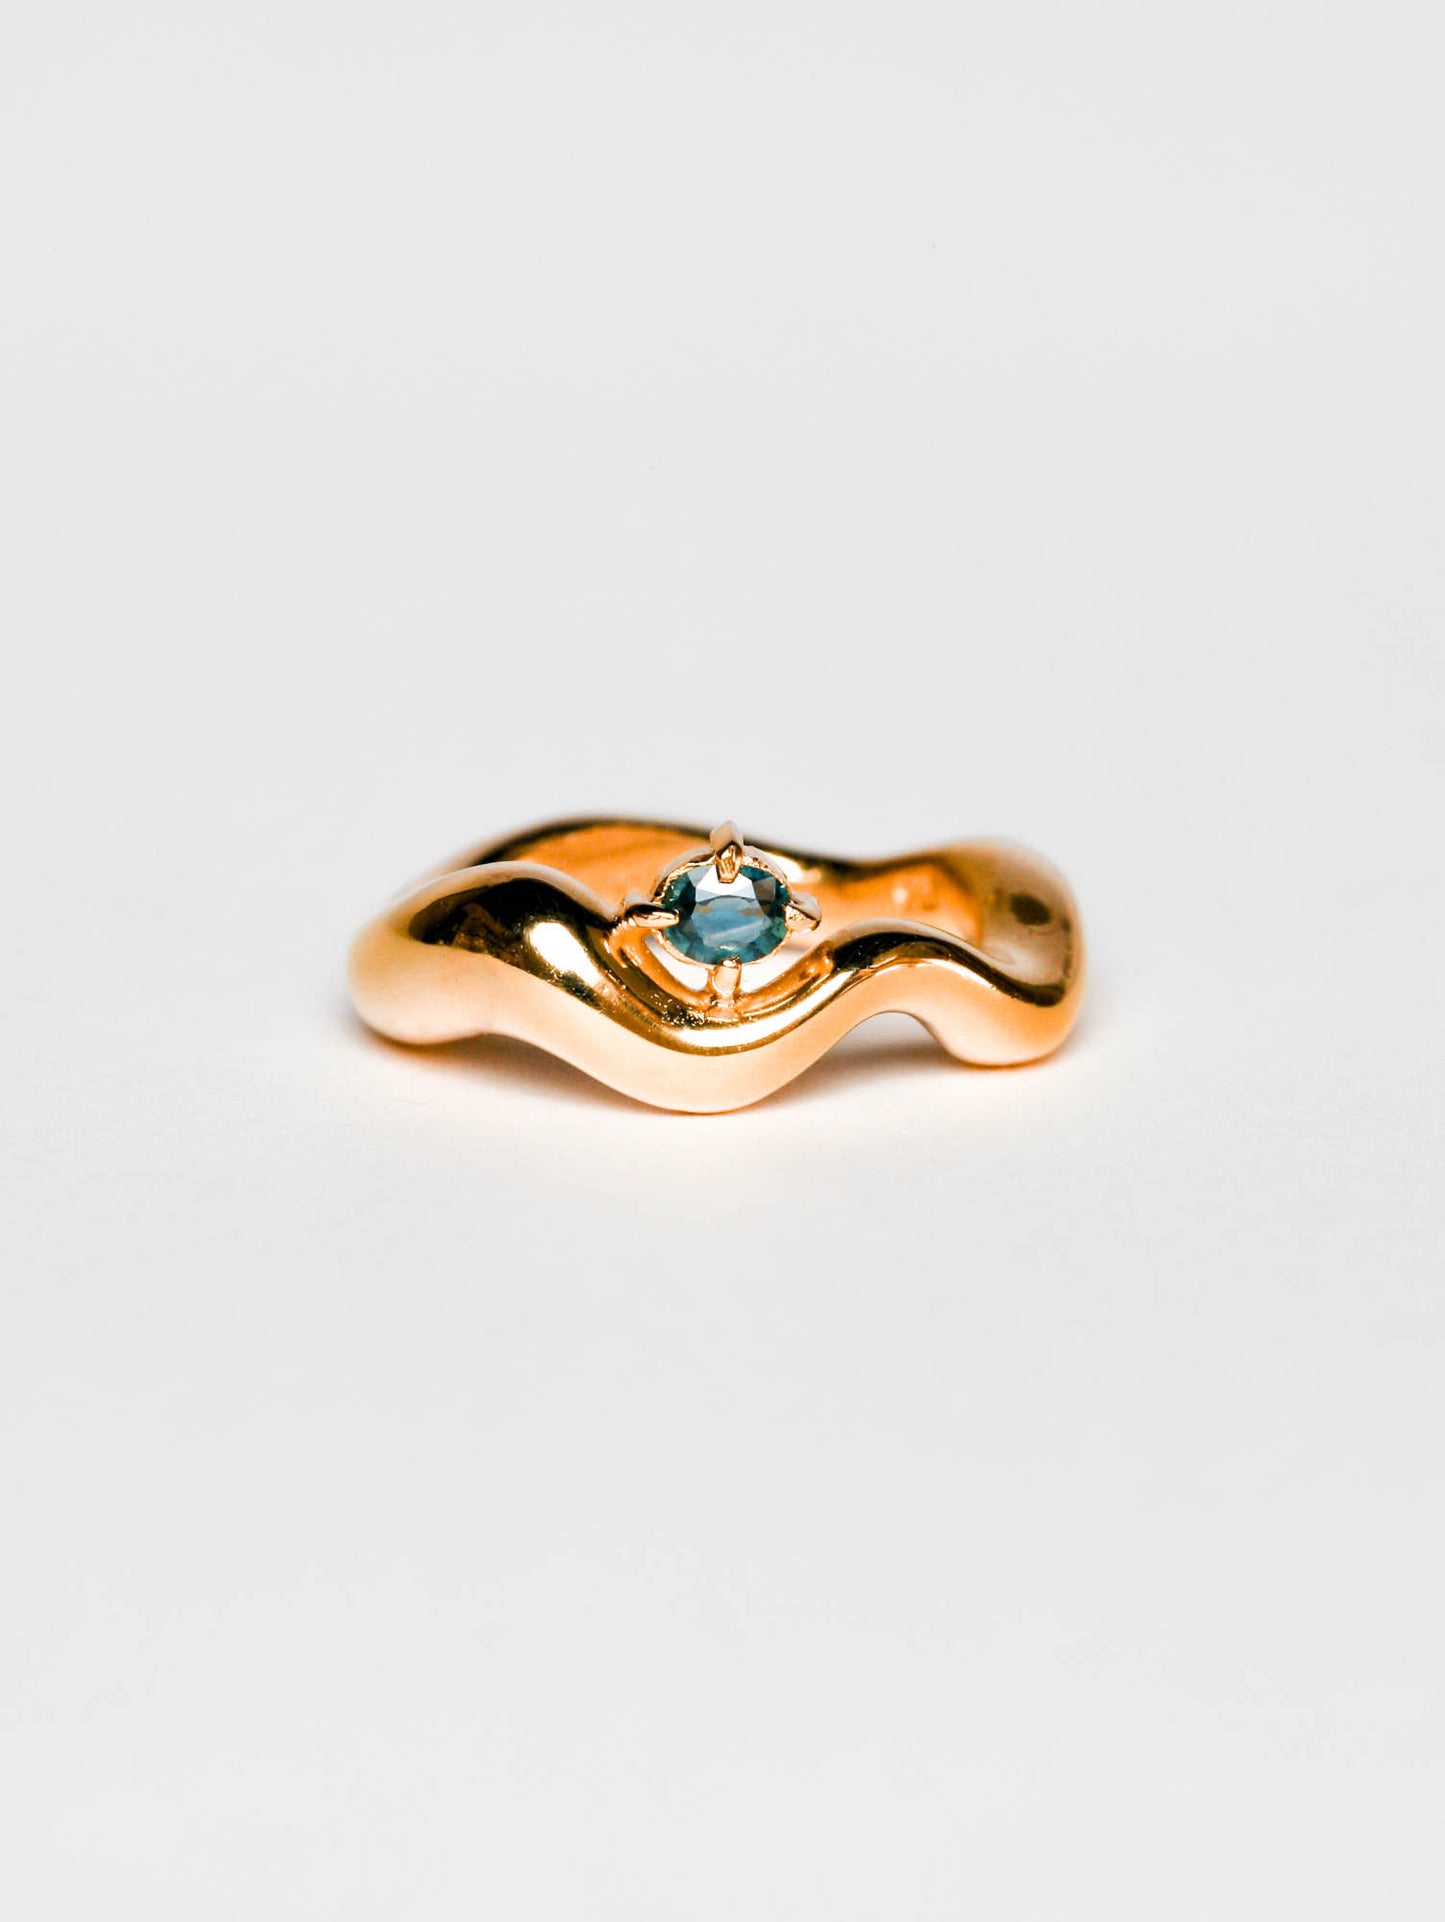 Wave Ring Gold with single Sapphire Stone # 2 | Size 7